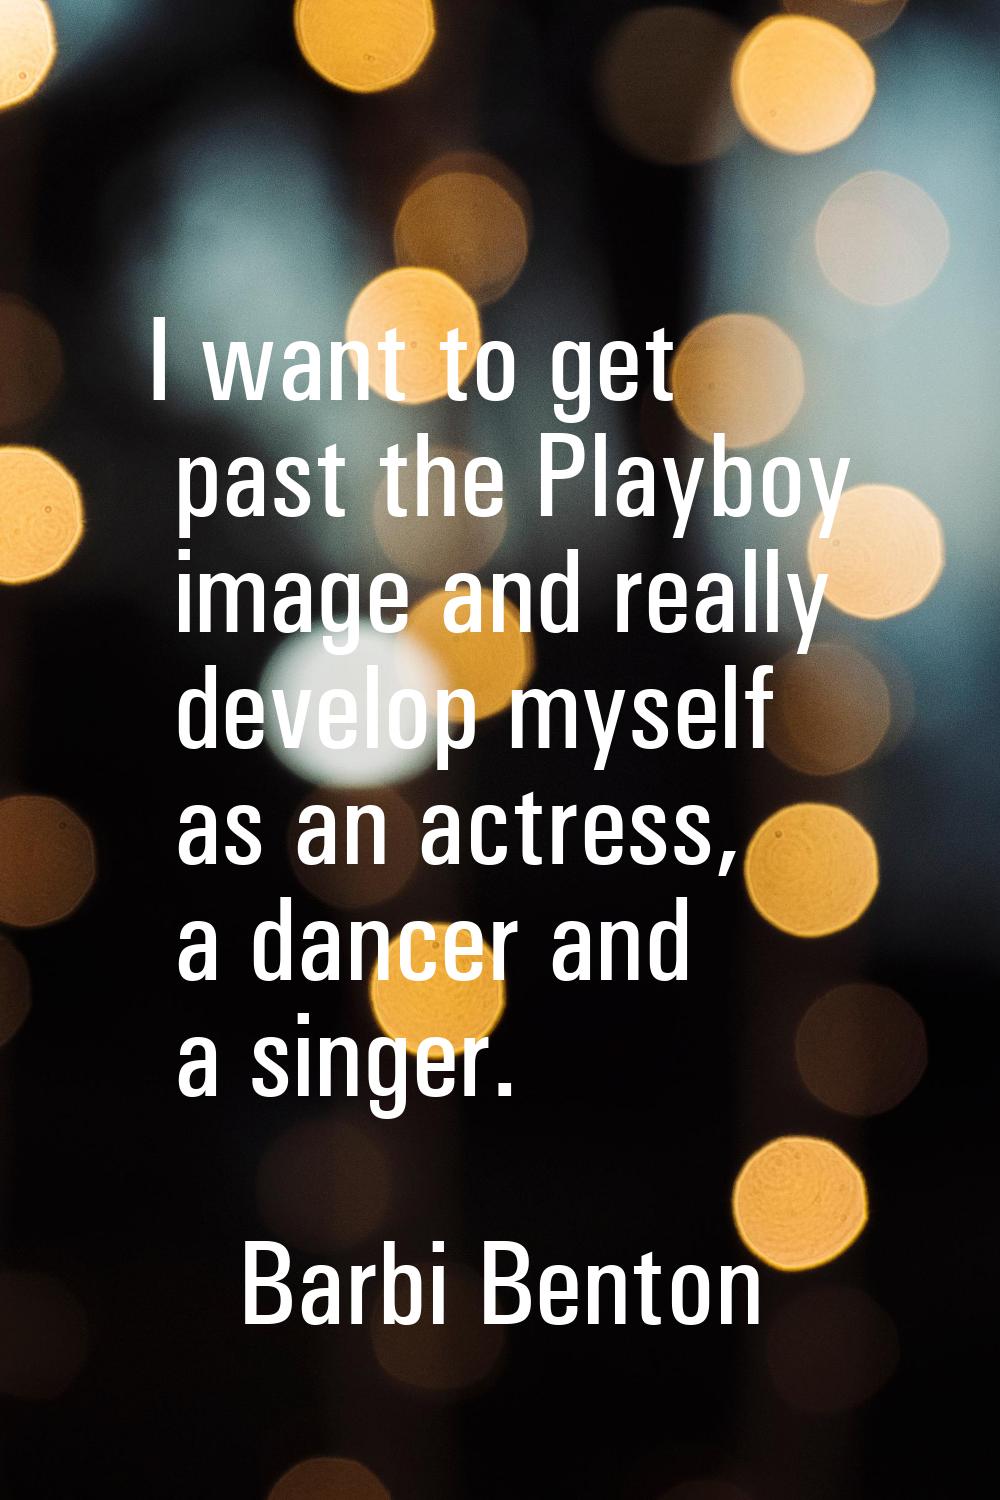 I want to get past the Playboy image and really develop myself as an actress, a dancer and a singer